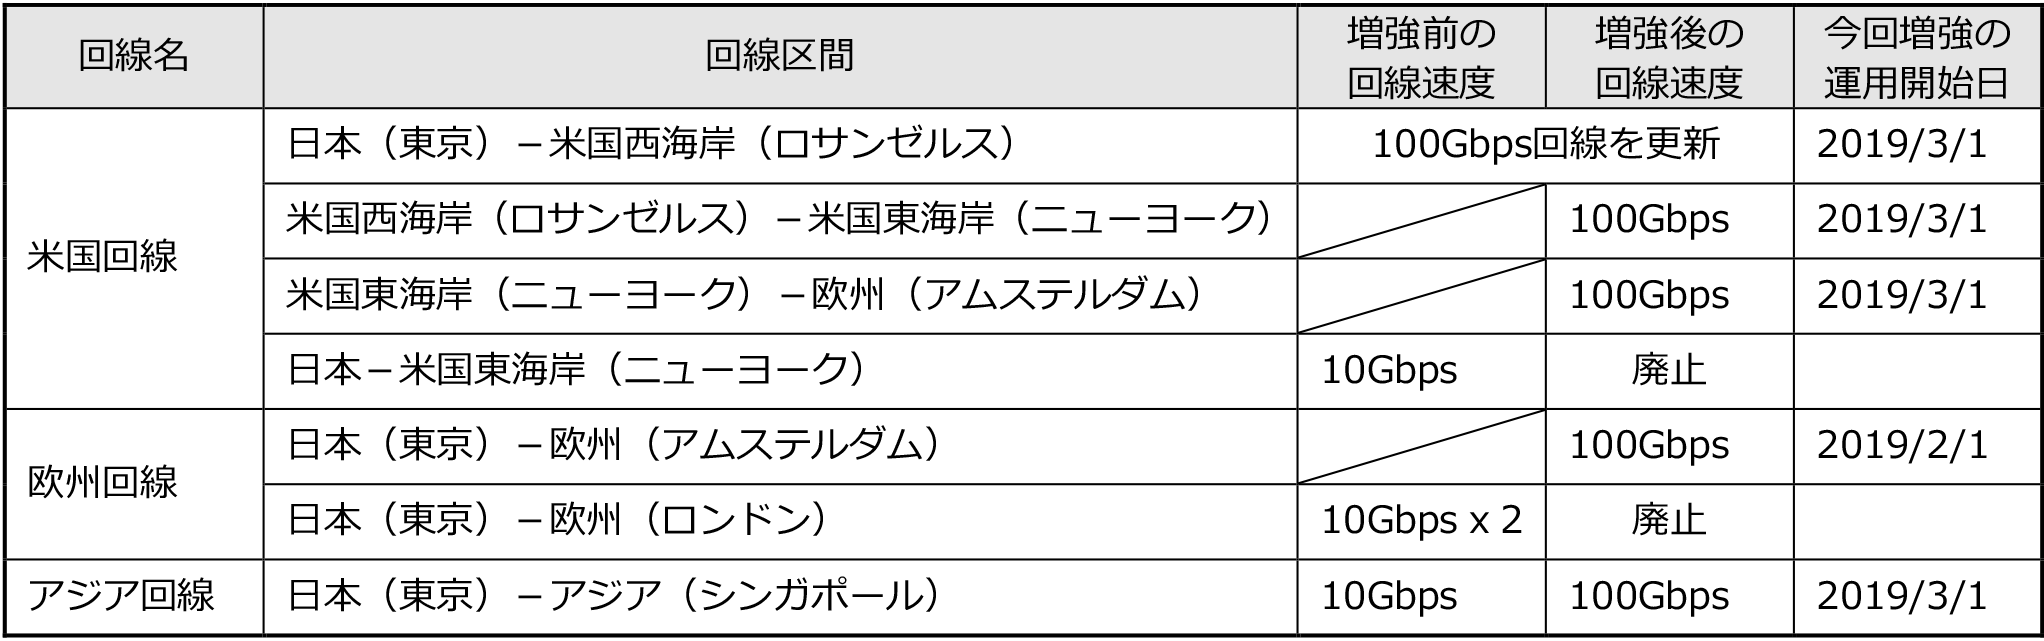 nii_newsrelease_20190301_table1.png